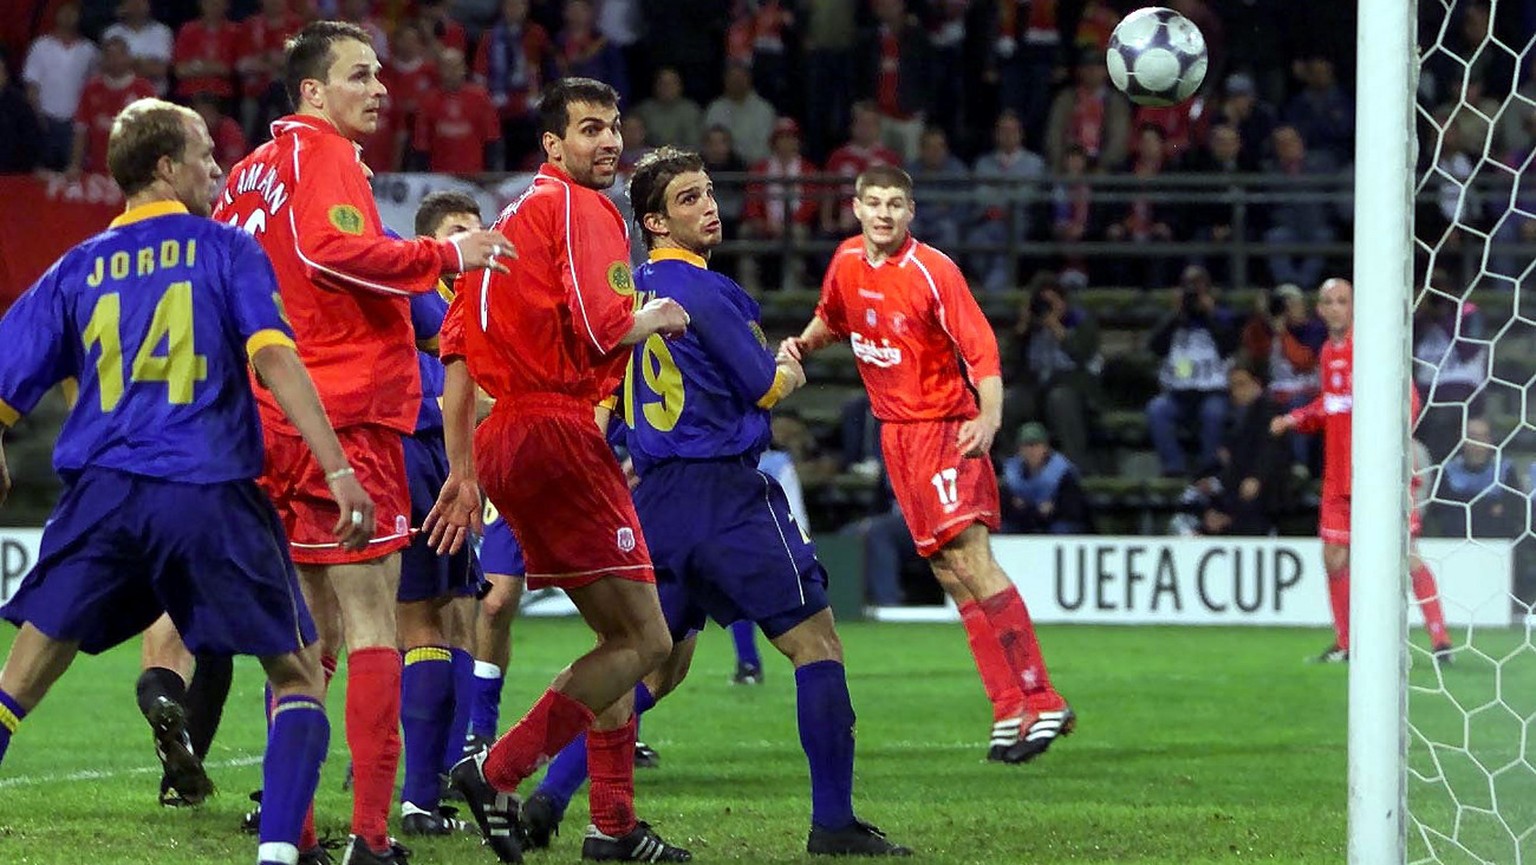 Players watch the ball go into the net, an own goal by Delfi Geli, to give Liverpool a 5-4 victory against Deportivo Alaves, Spain, during the UEFA Cup final in Dortmund, Germany, on Wednesday, May 16 ...